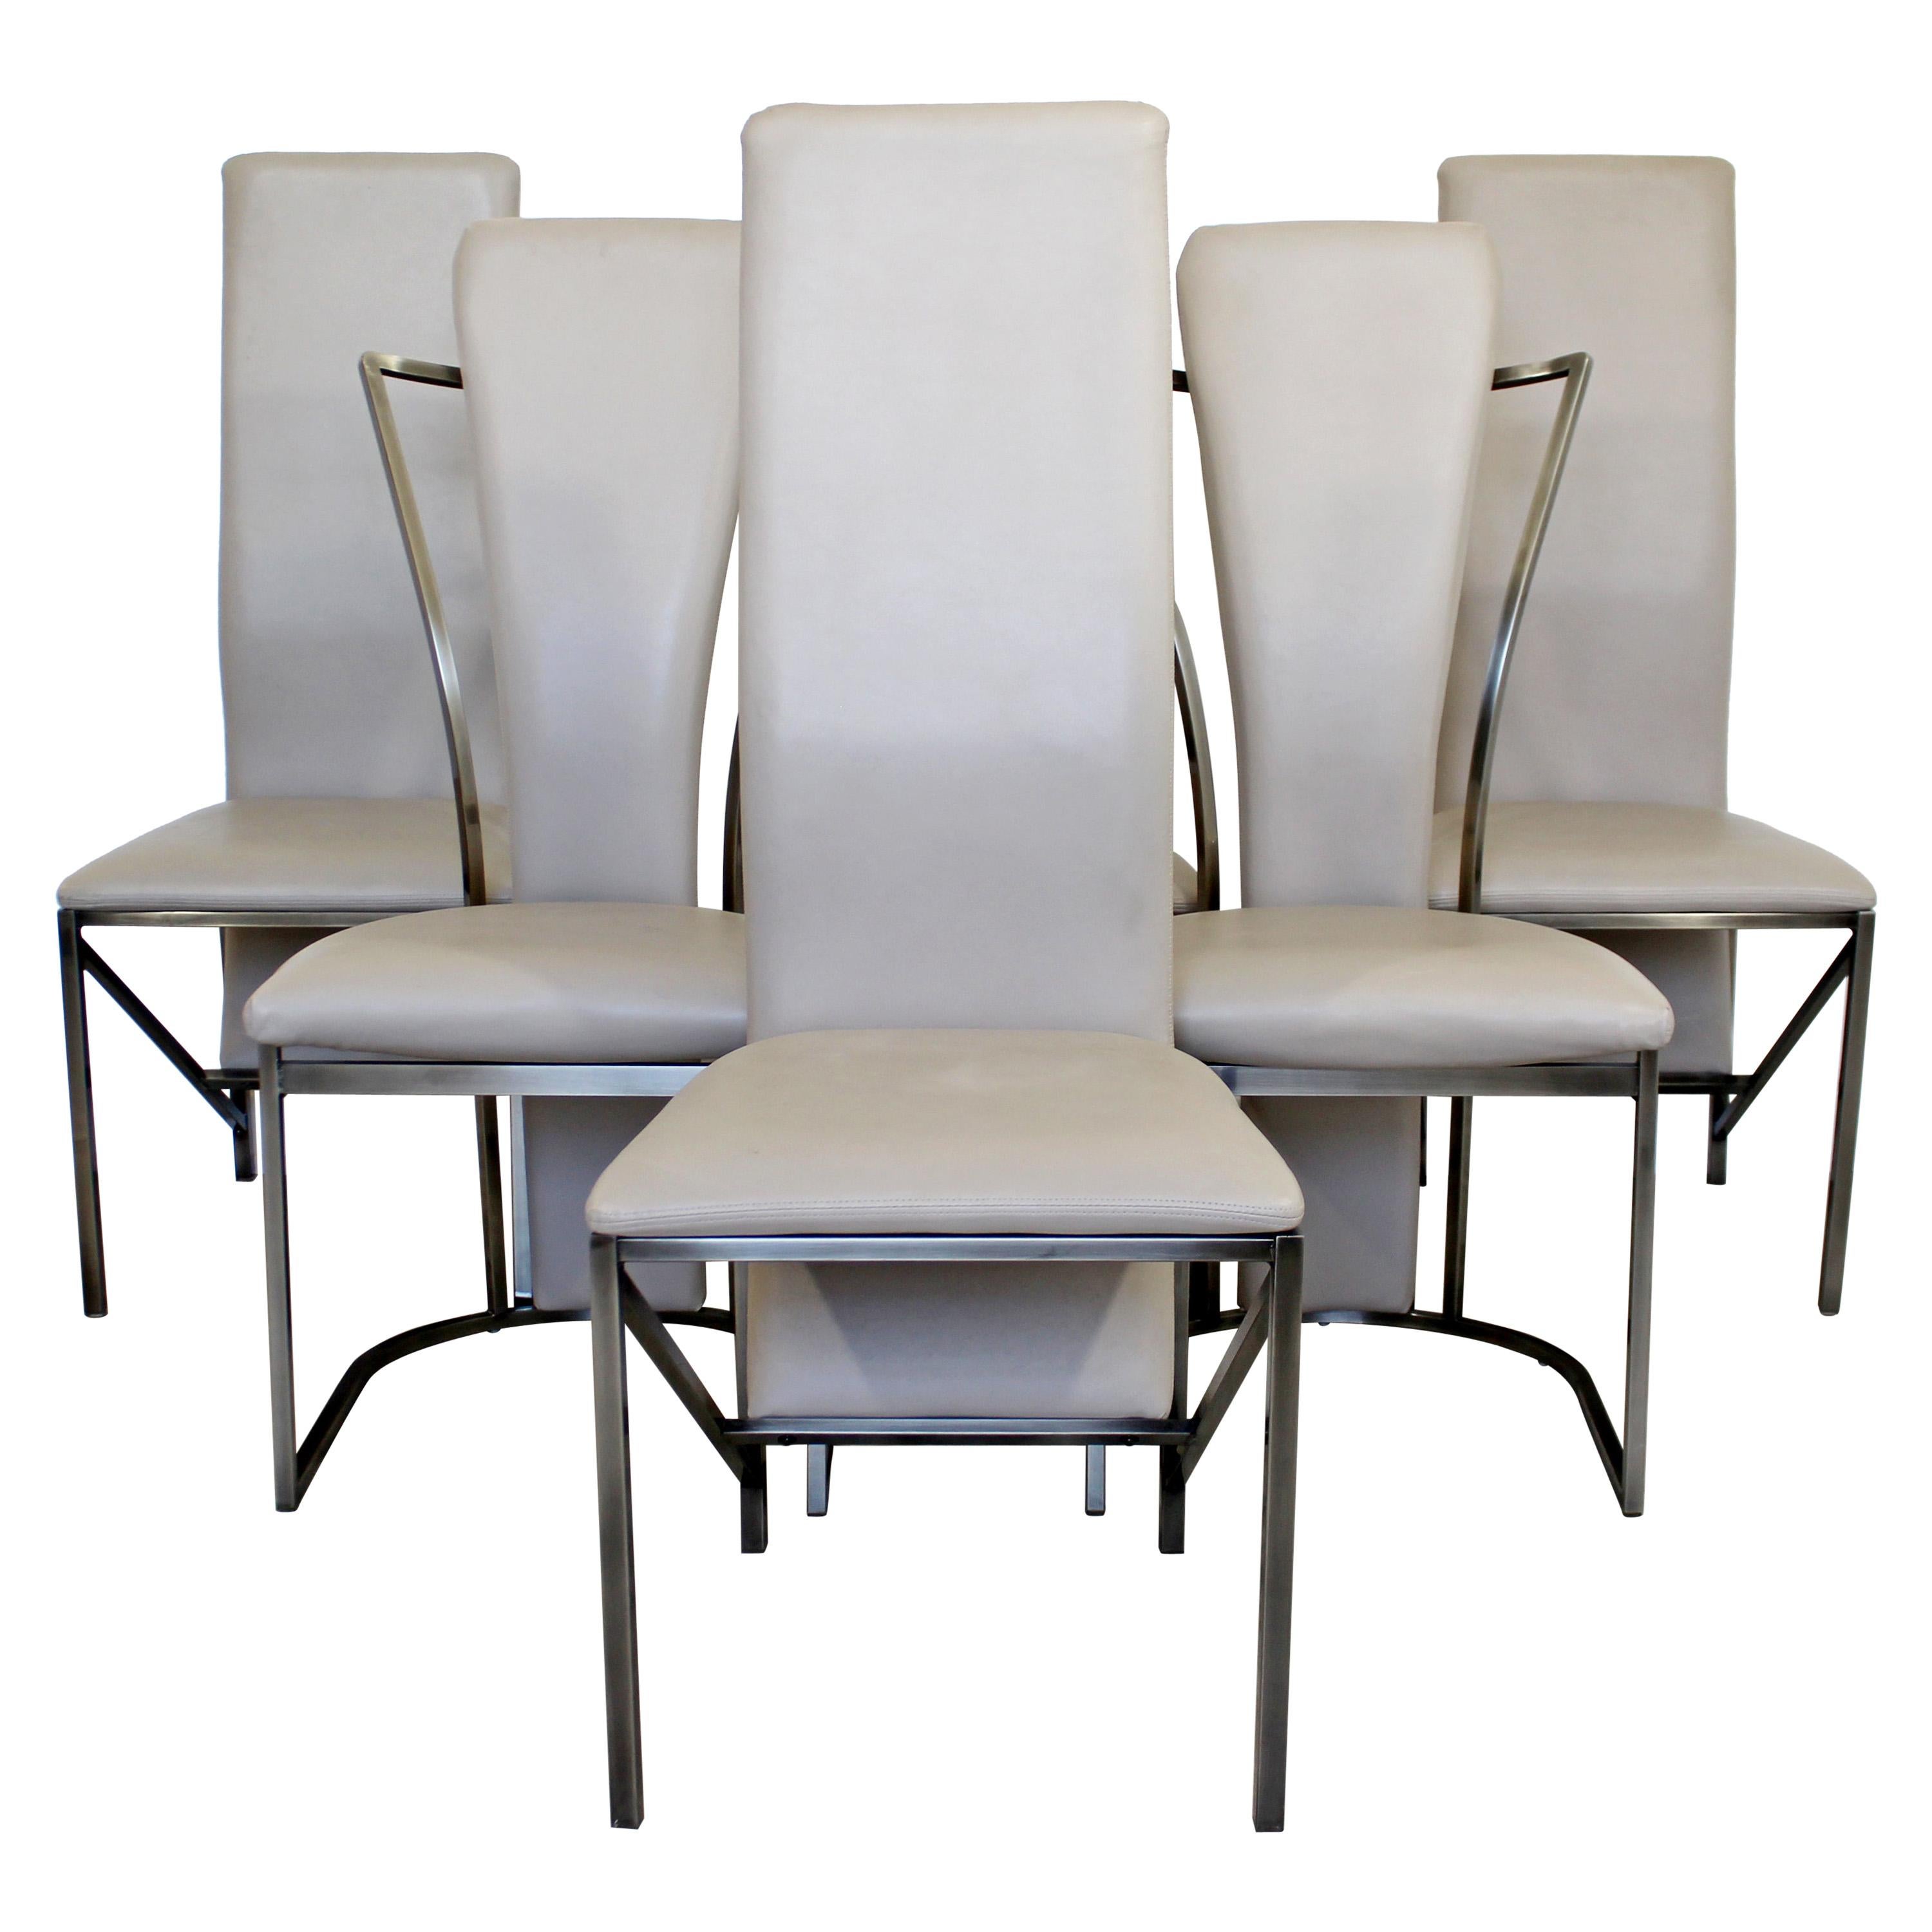 Contemporary Modern Sculptural DIA Set of 6 Chrome & Leather Dining Chairs, 1990